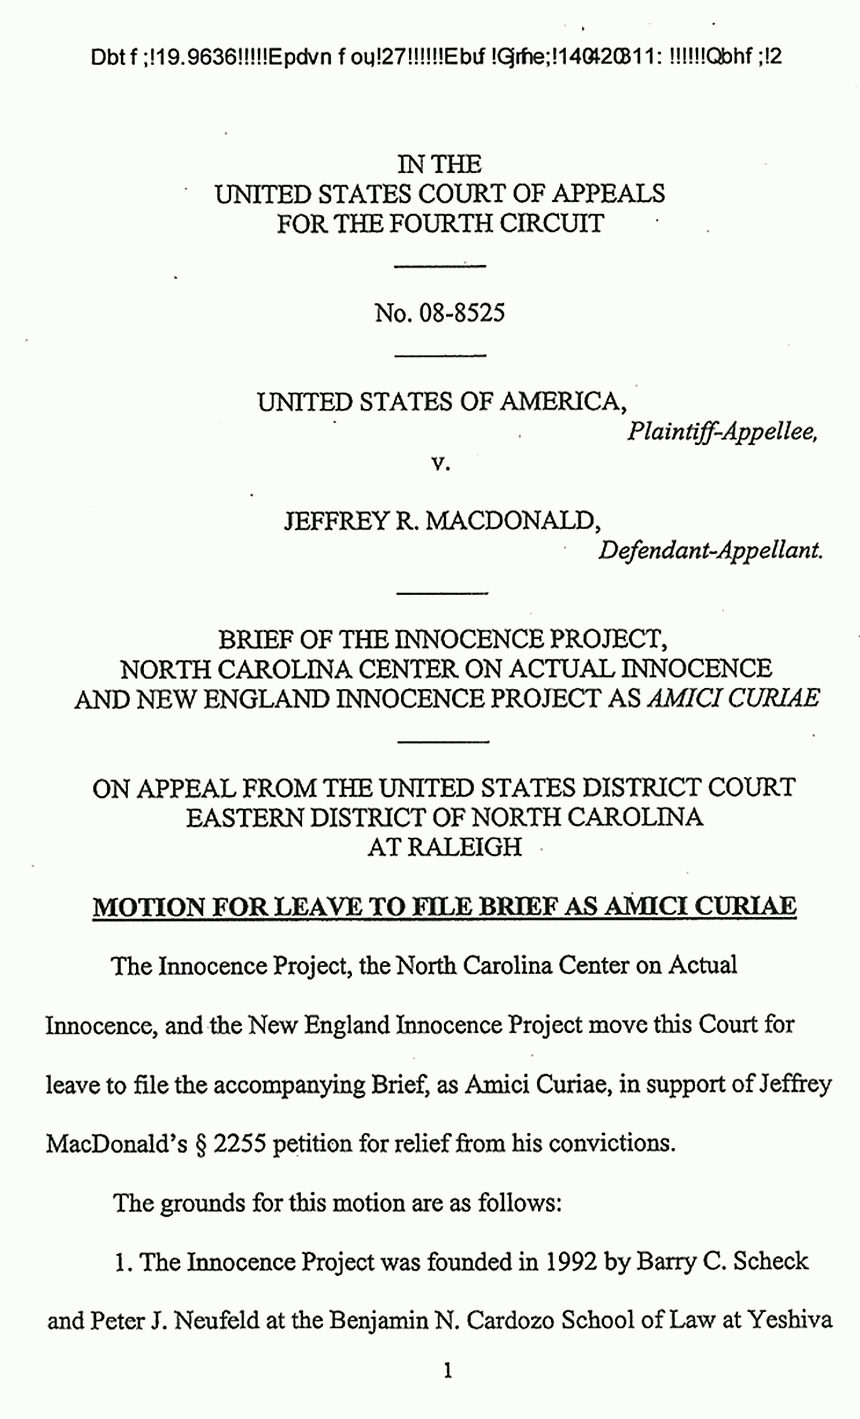 March 31, 2009: U. S. Court of Appeals for the Fourth Circuit: Motion of the Innocence Project, the North Carolina Center of Actual Innocence, and the New England Innocence Project for Leave to File Brief as Amicus Curiae, p. 1 of 5